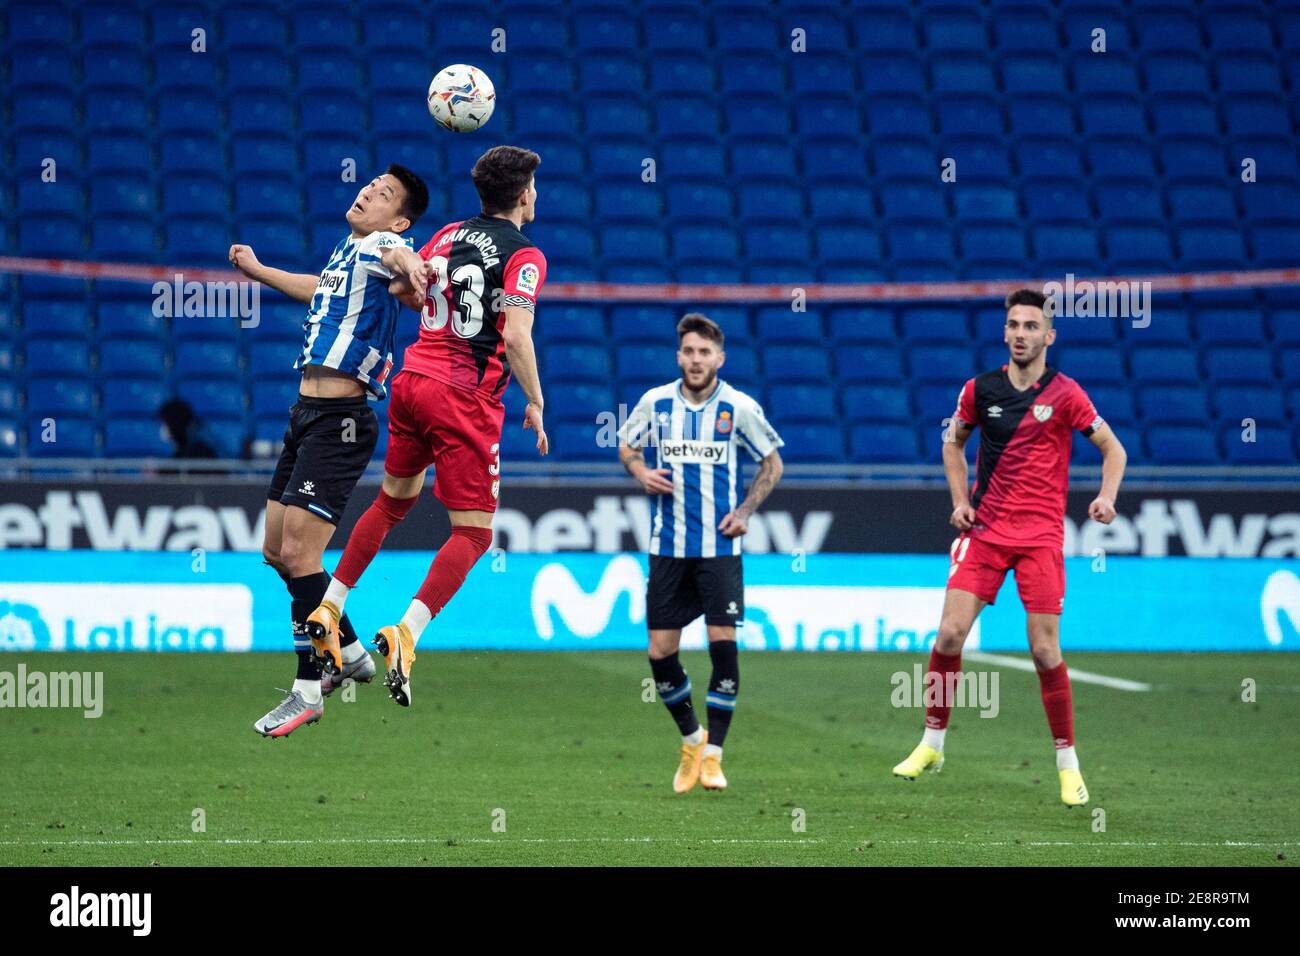 Cornella, Spain. 31st Jan, 2021. Espanyol's Wu Lei (1st L) vies with Vallecano's Fran Garcia (2nd L) during a Spanish second division league match between RCD Espanyol and Rayo Vallecano in Cornella, Spain, on Jan. 31, 2021. Credit: Joan Gosa/Xinhua/Alamy Live News Stock Photo